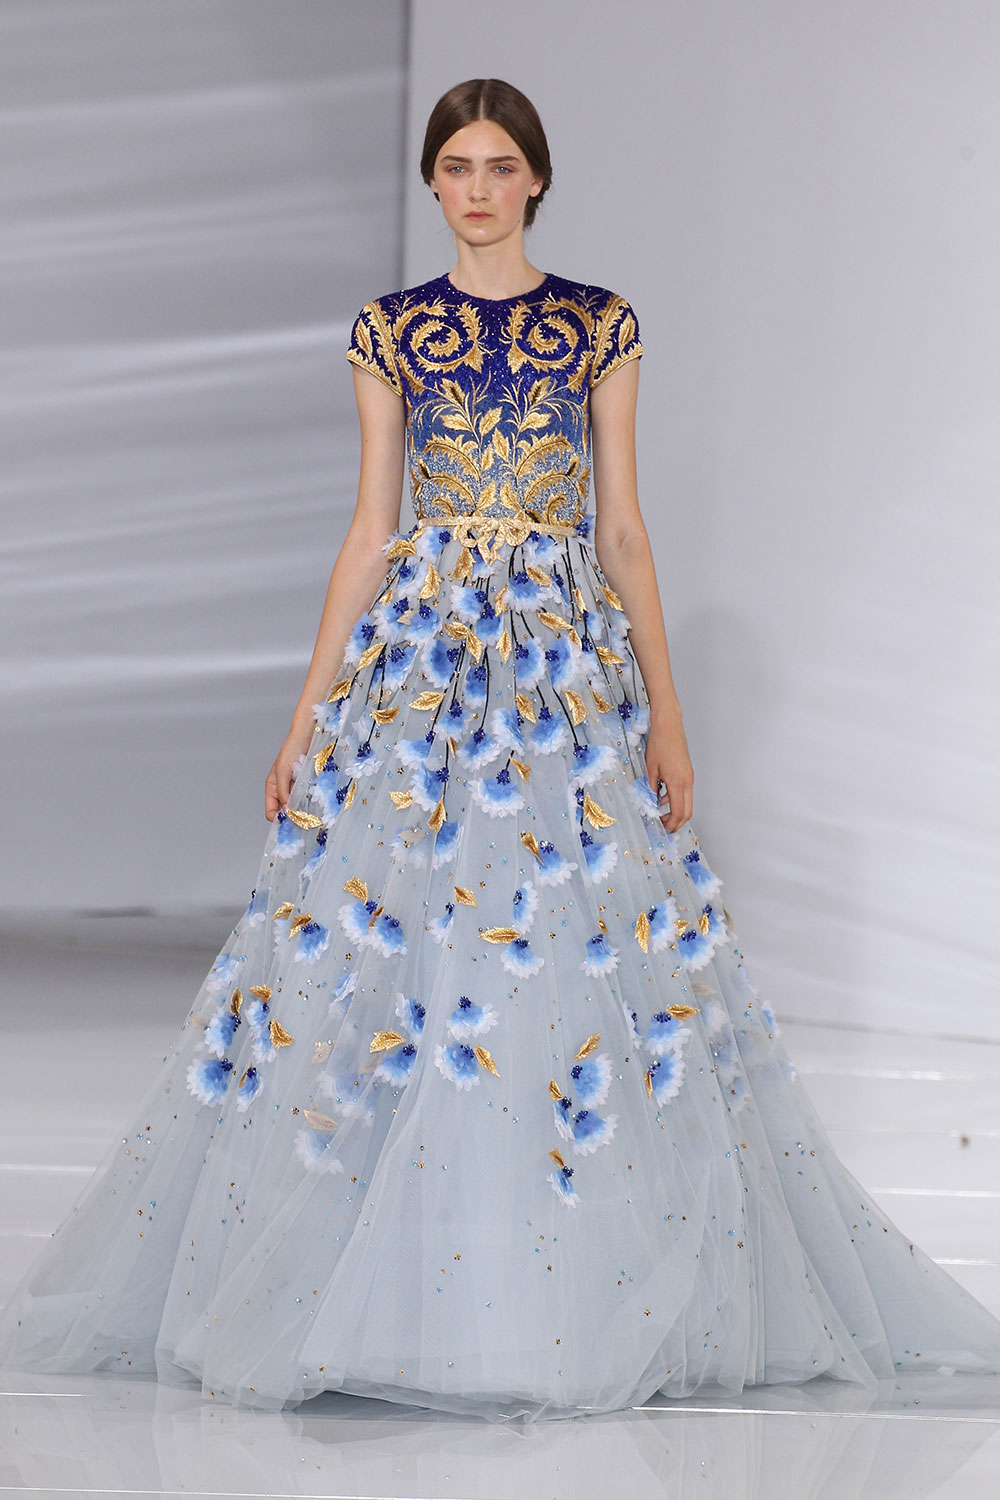 Look 39 from the Georges Hobeika show at Paris Fashion Week Haute Couture FW 2015/2016. Photo / Getty Images